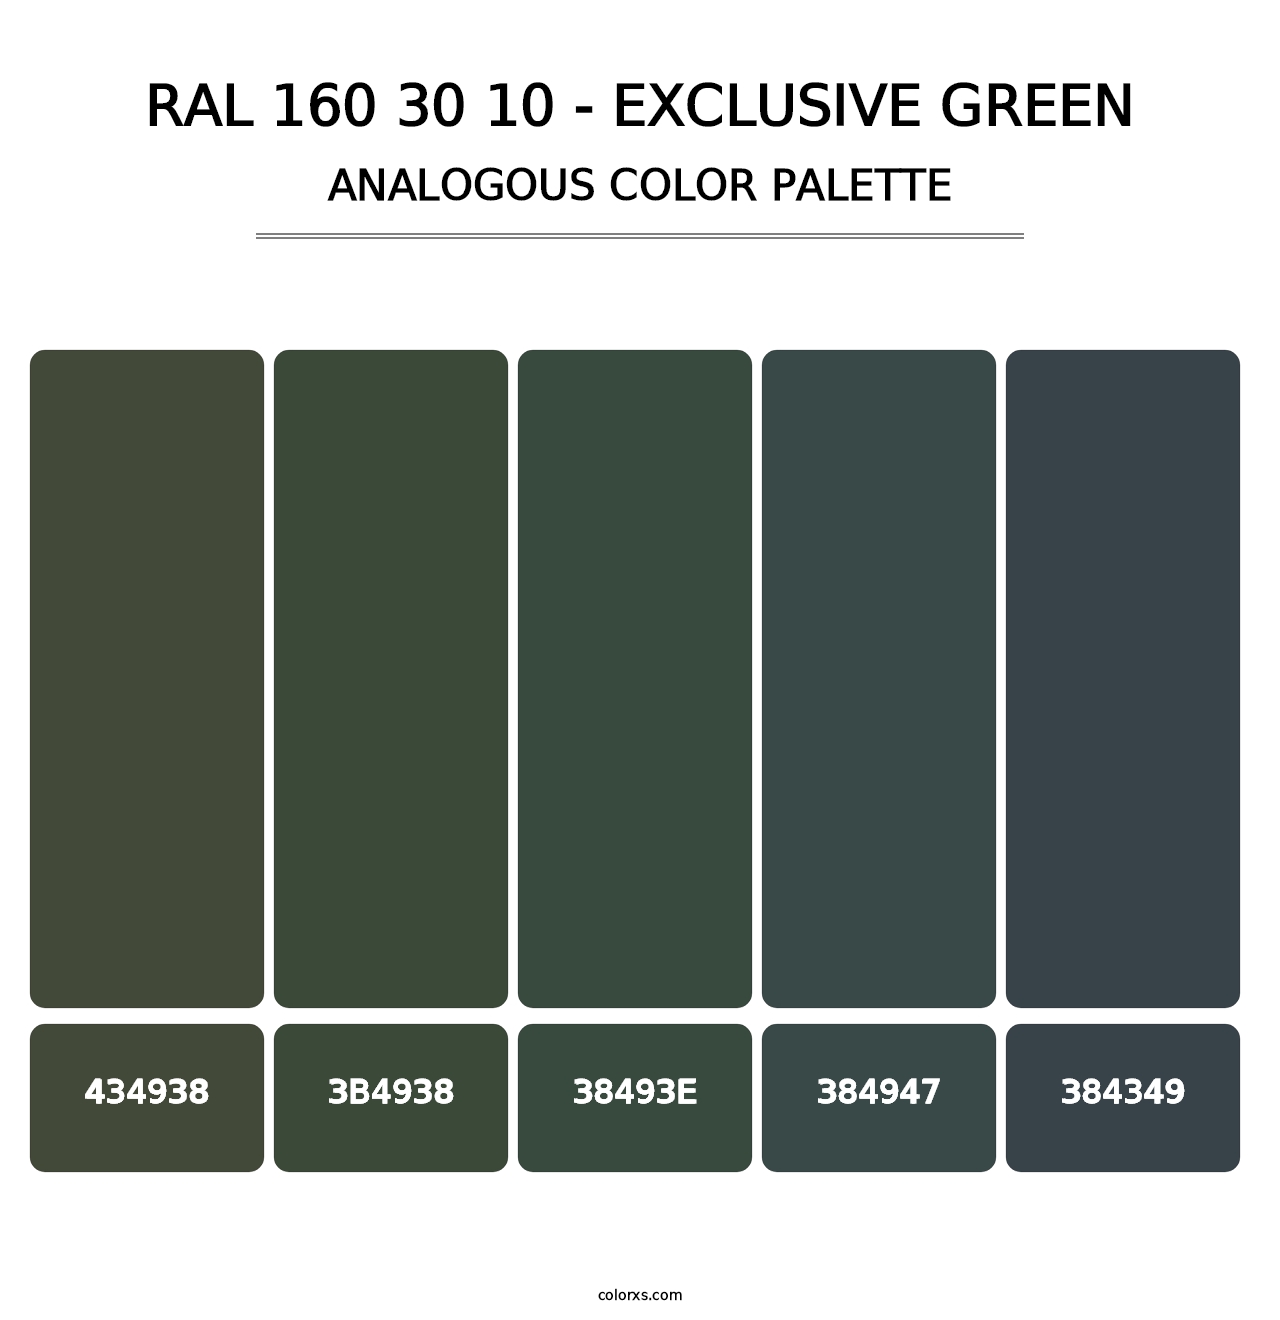 RAL 160 30 10 - Exclusive Green - Analogous Color Palette